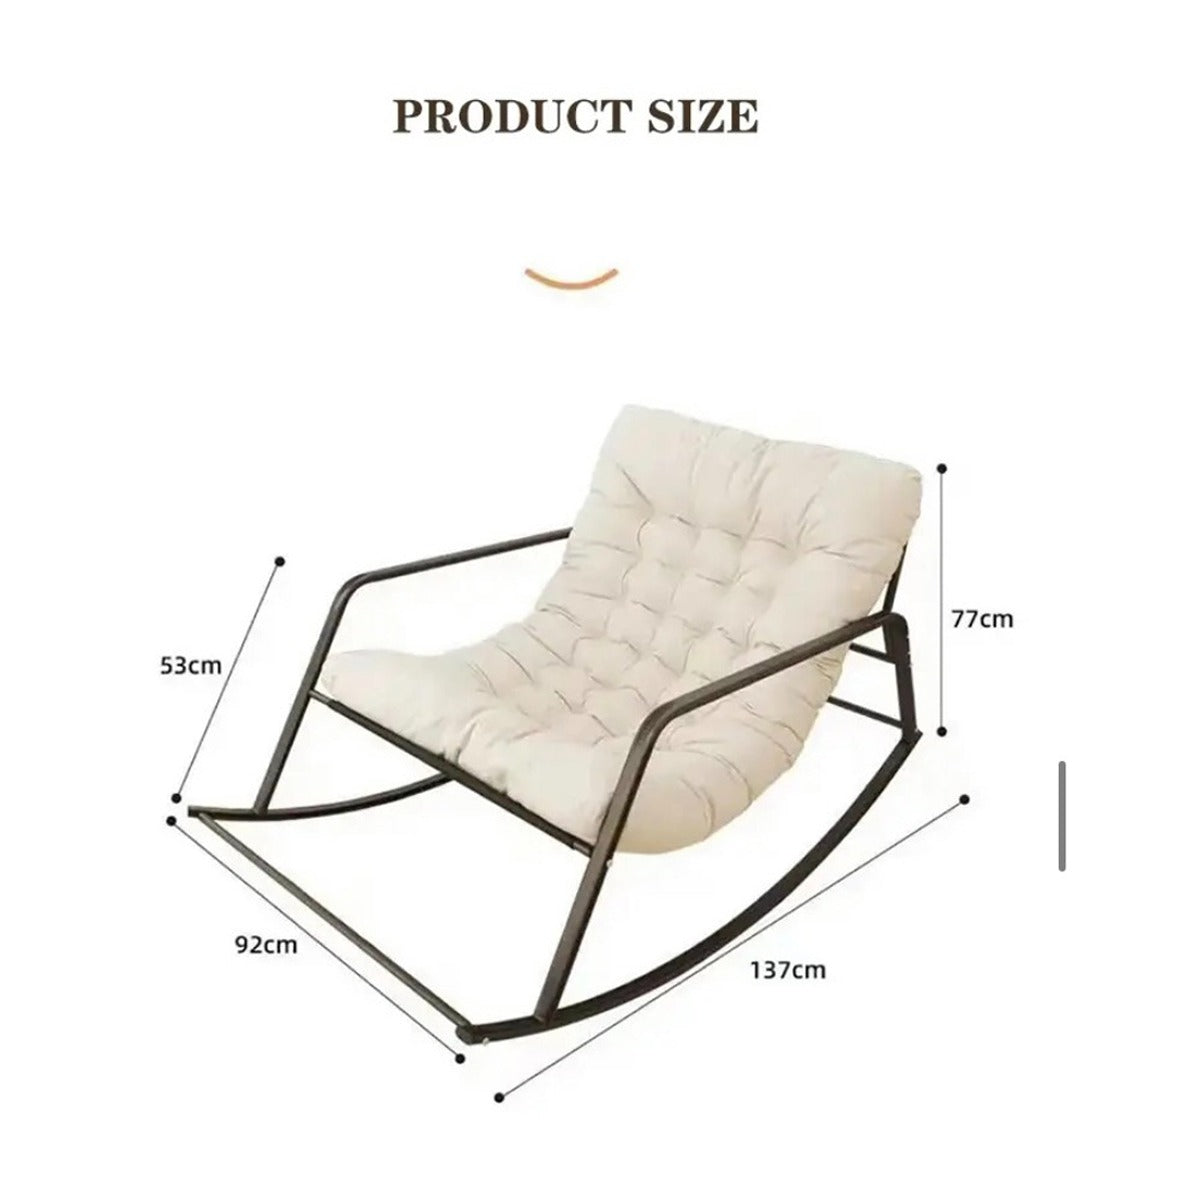 Relaxing Rocking Chair - Size